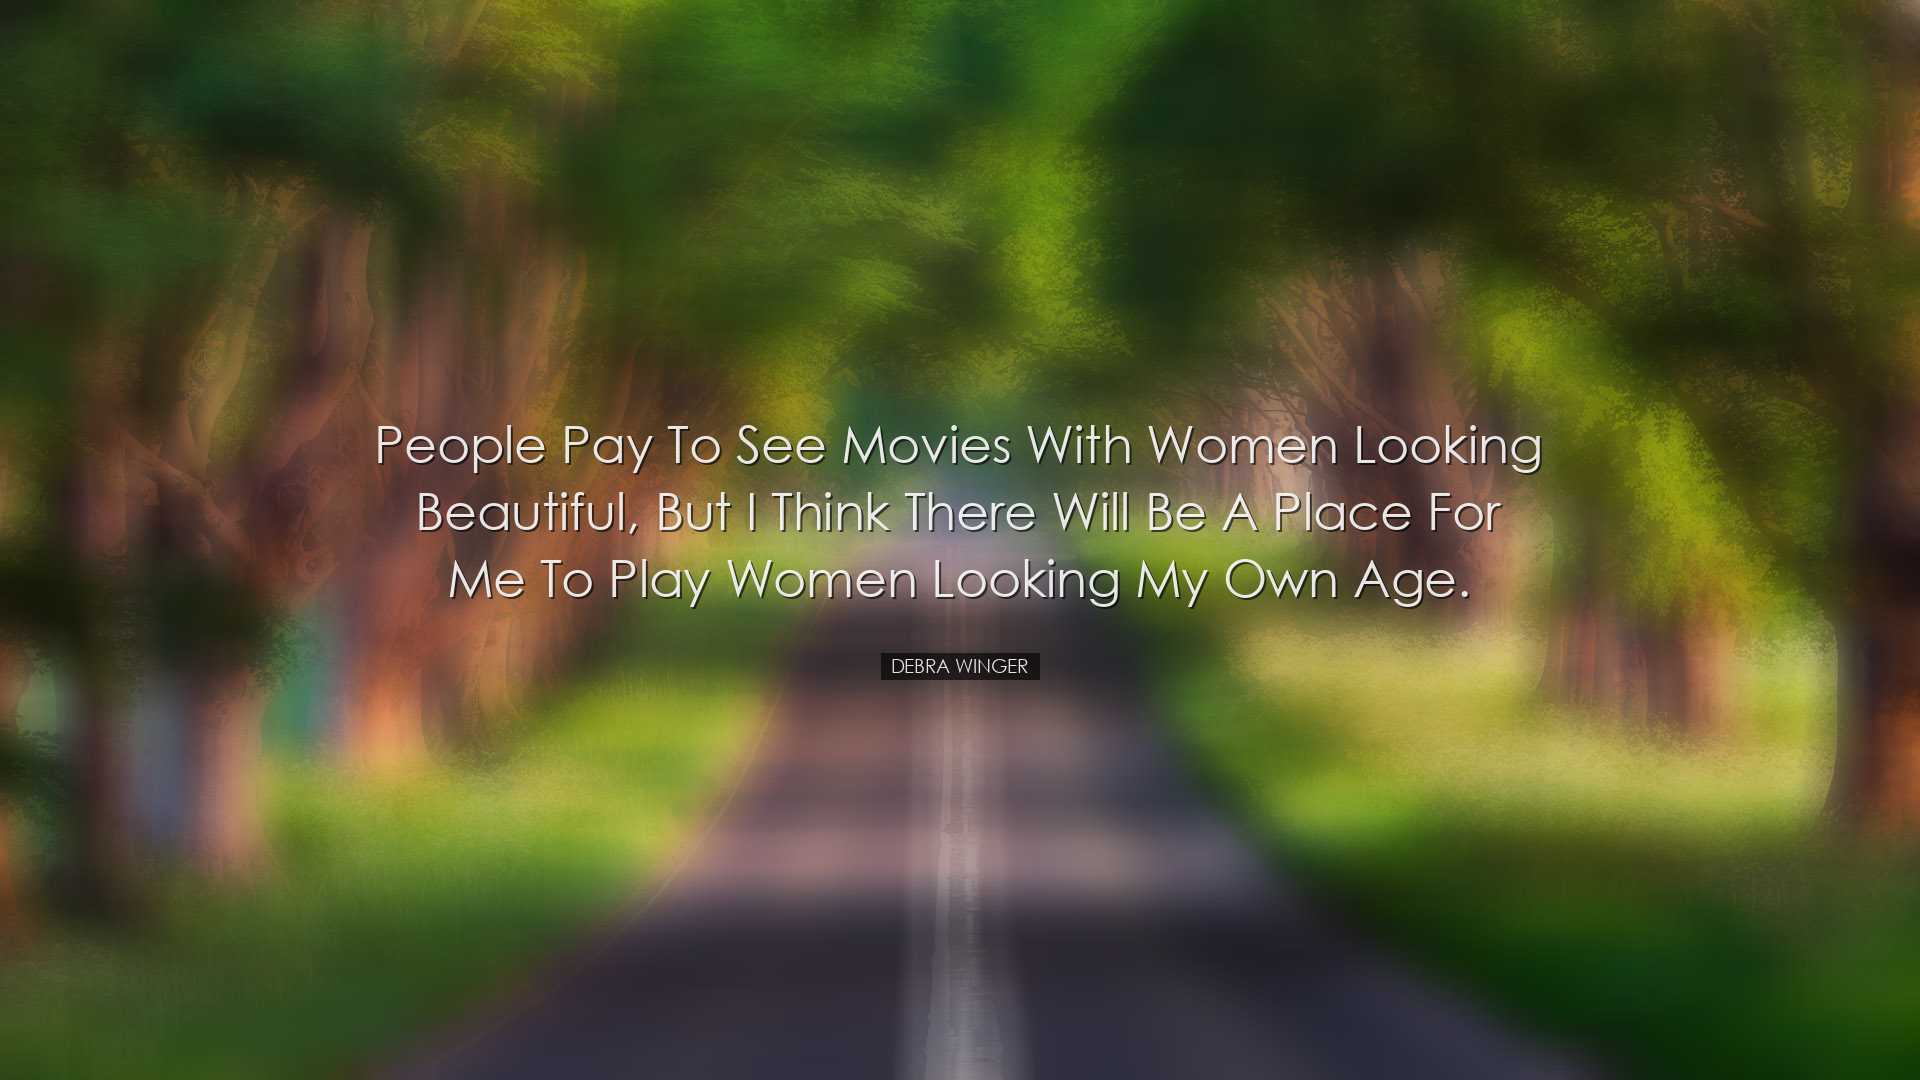 People pay to see movies with women looking beautiful, but I think